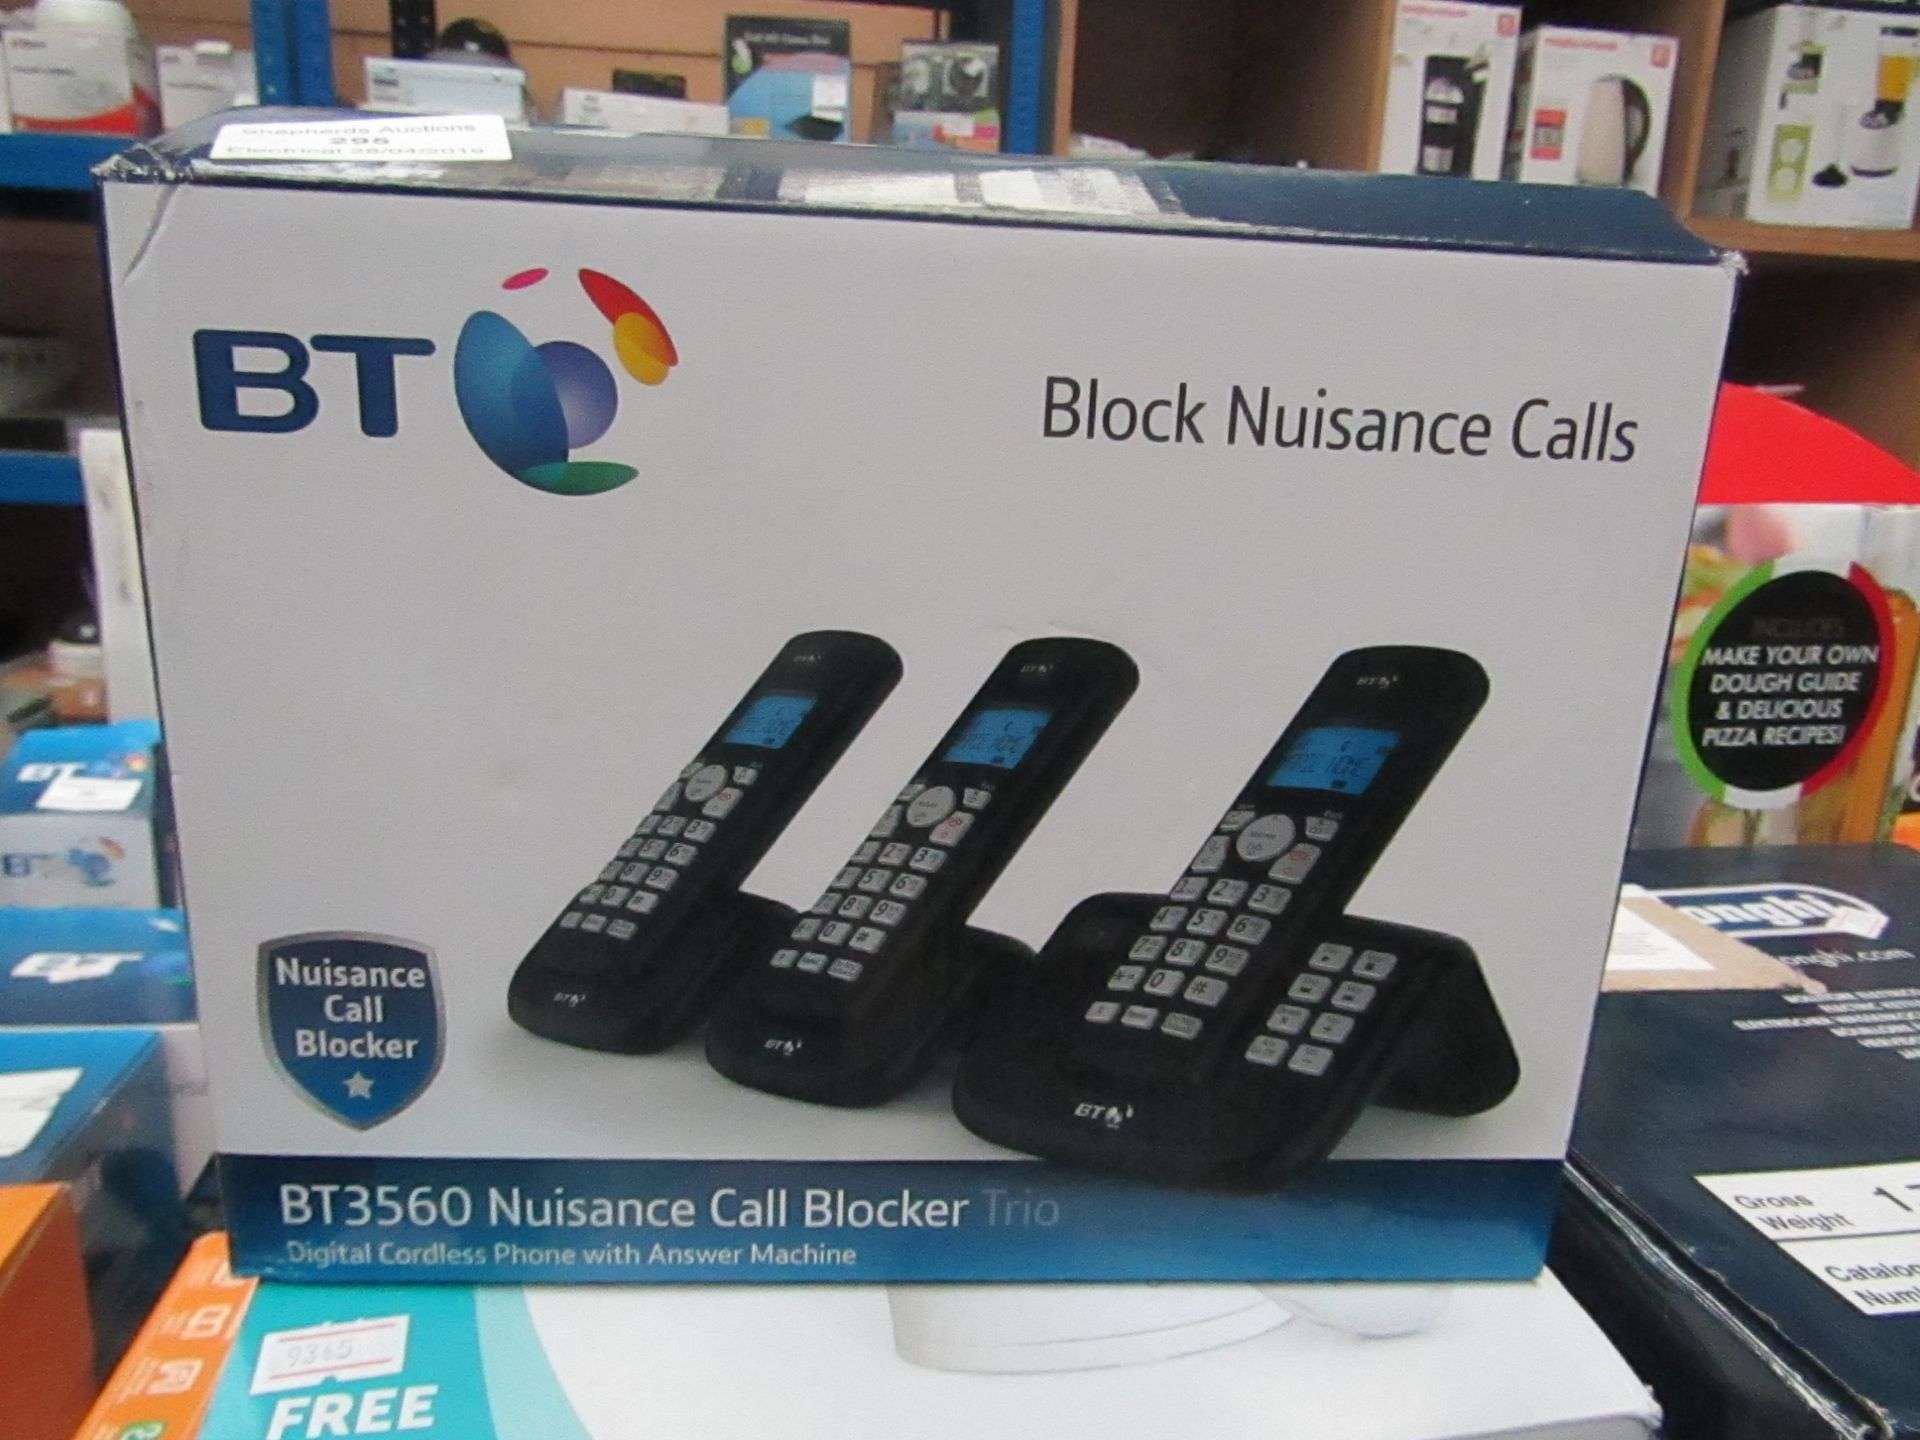 BT BT3560 nuisance call blocker trio digital cordless phone with answering machine, complete but